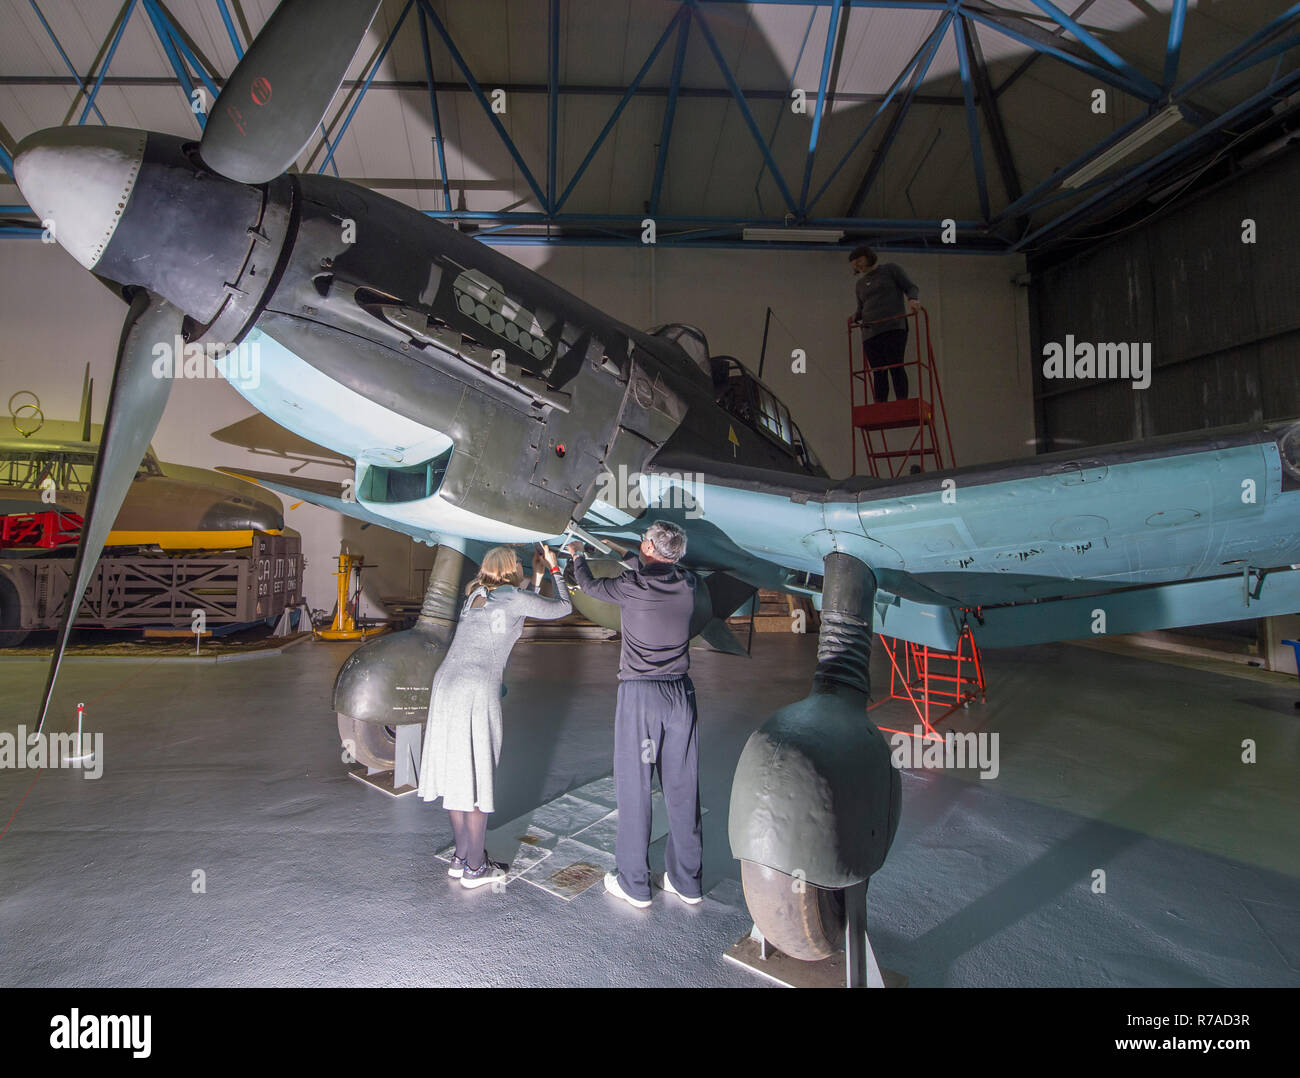 RAF Museum, London, UK. 8 December, 2018. To celebrate 100 years since the formation of the RAF, RAF Museum London offer visitors the last chance to get a closer look inside 14 cockpits and vehicles from the RAF Museum collection including a Hawker Hurricane, Hawker Typhoon, Liberator, Stuka (pictured) and Bristol Beaufort. Credit: Malcolm Park/Alamy Live News. Stock Photo